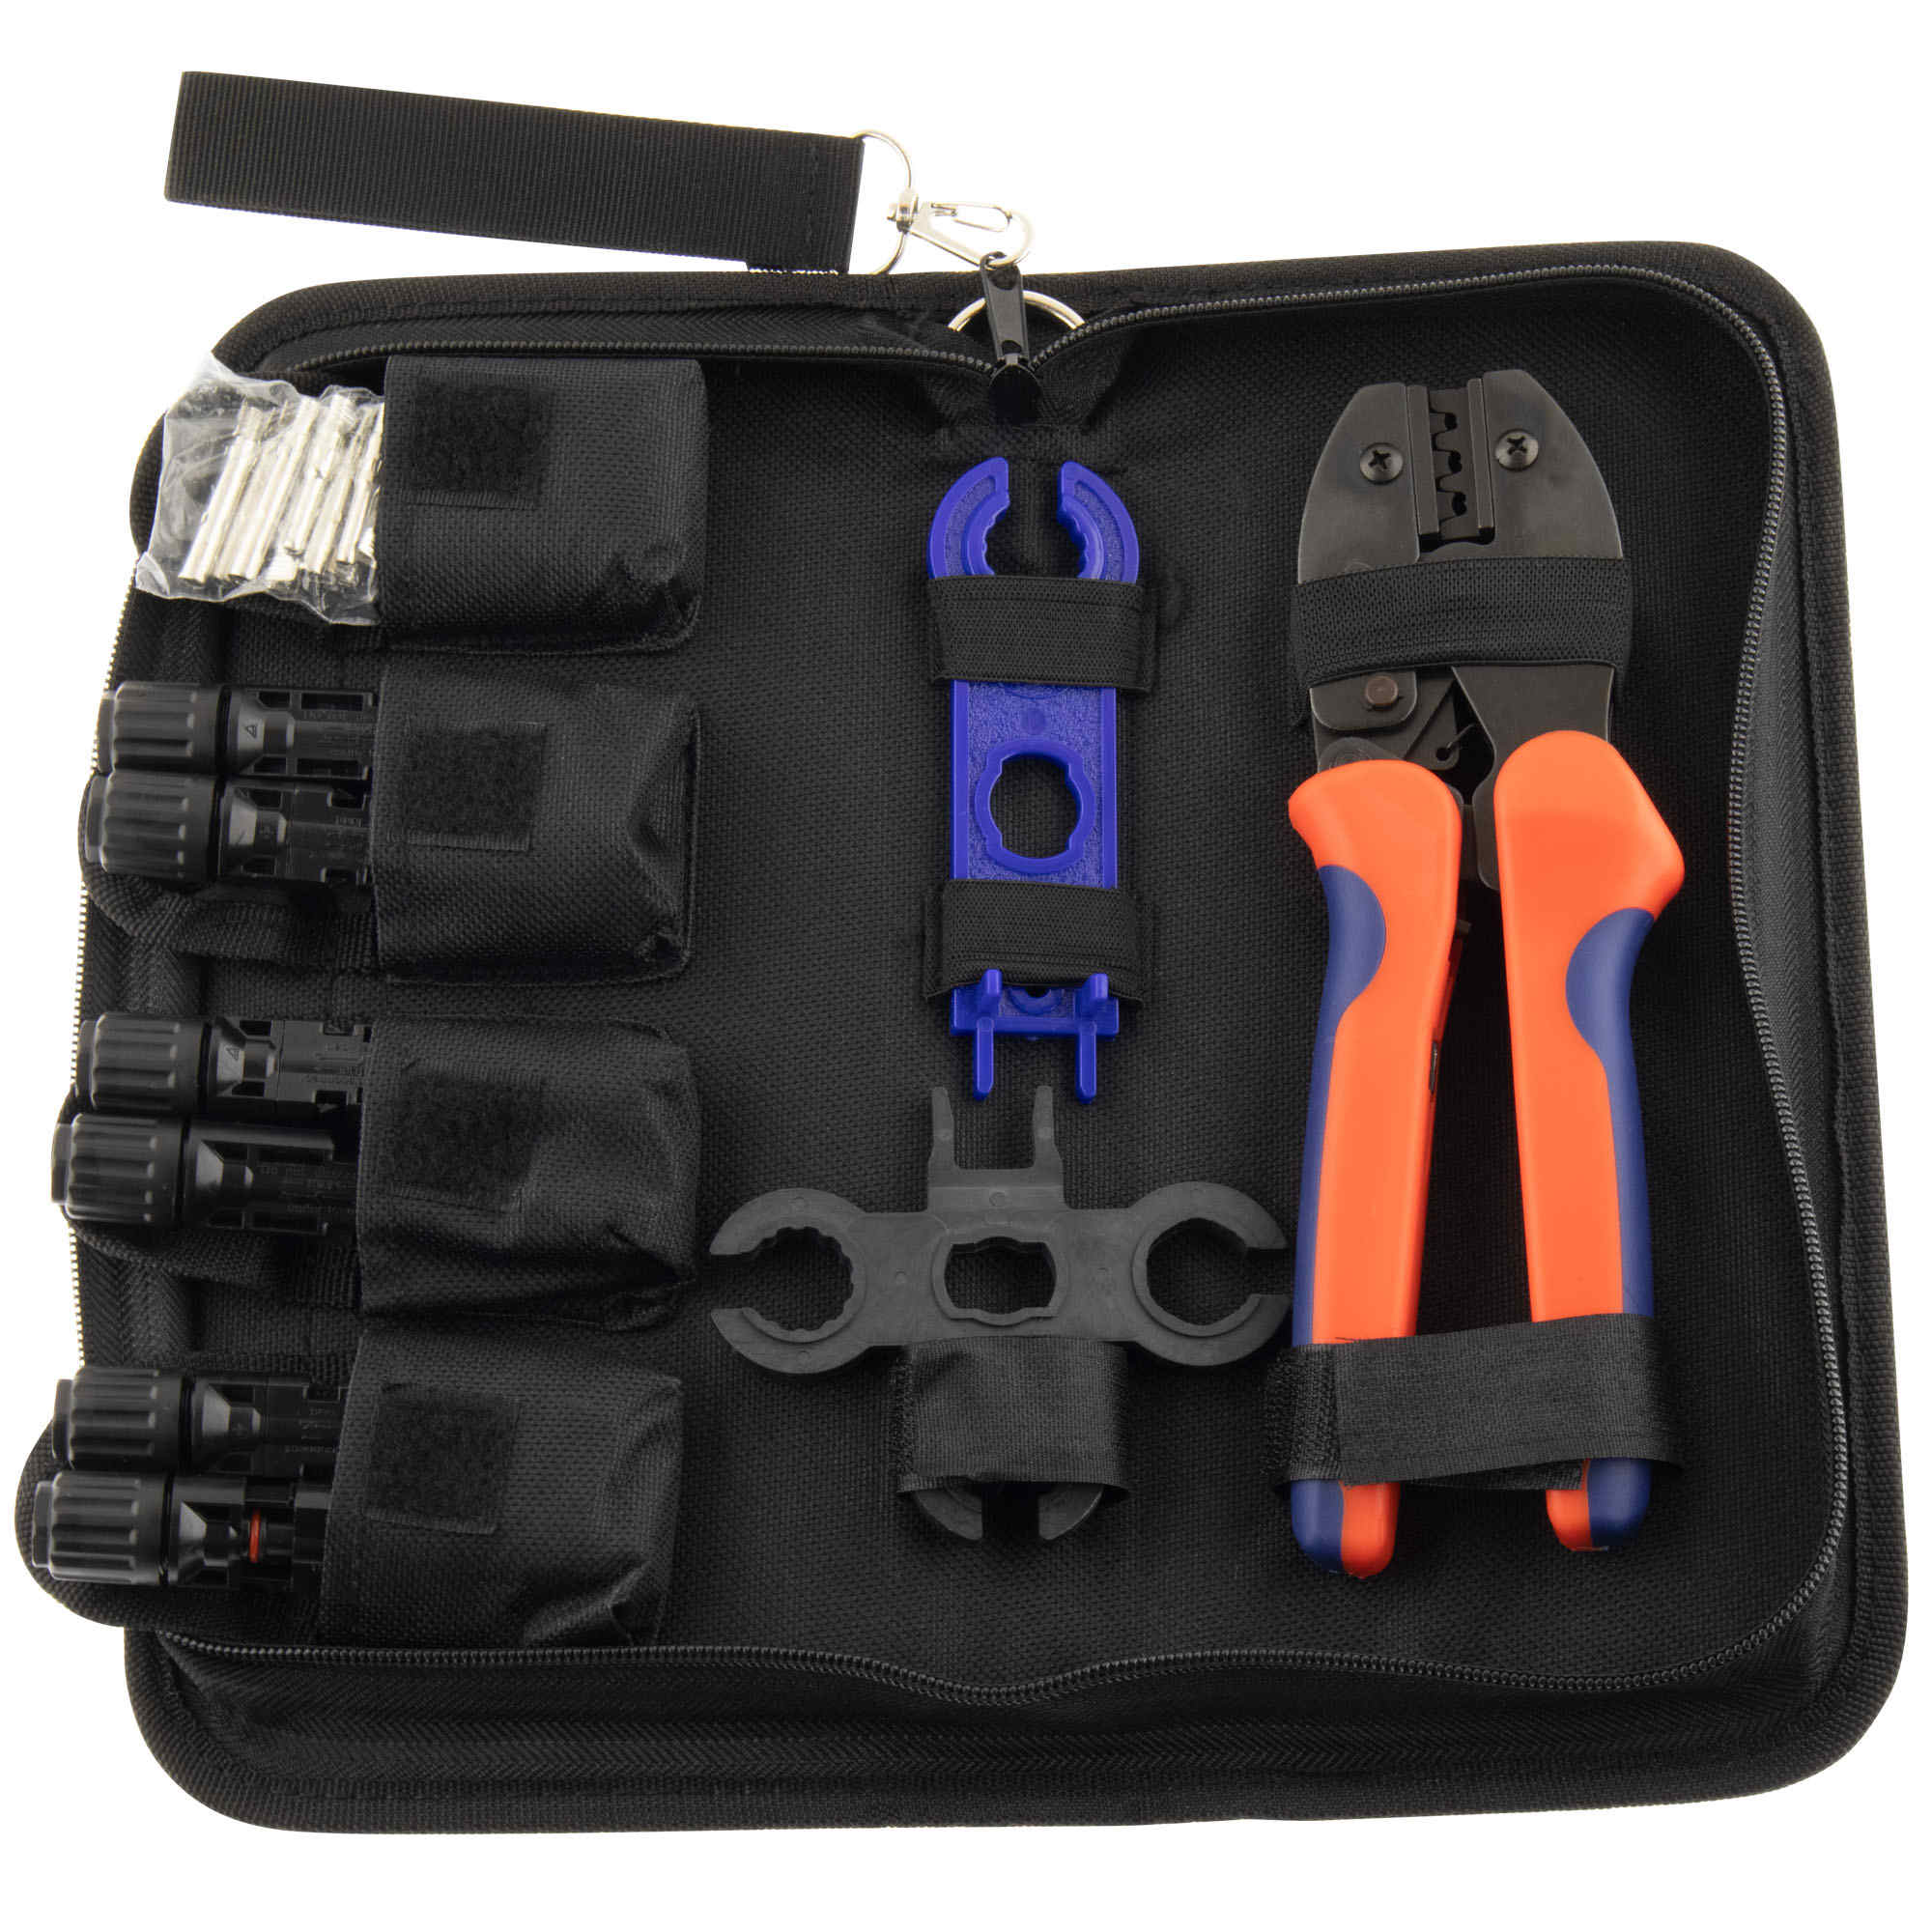 Photovoltaic Connector Set incl. crimping tool